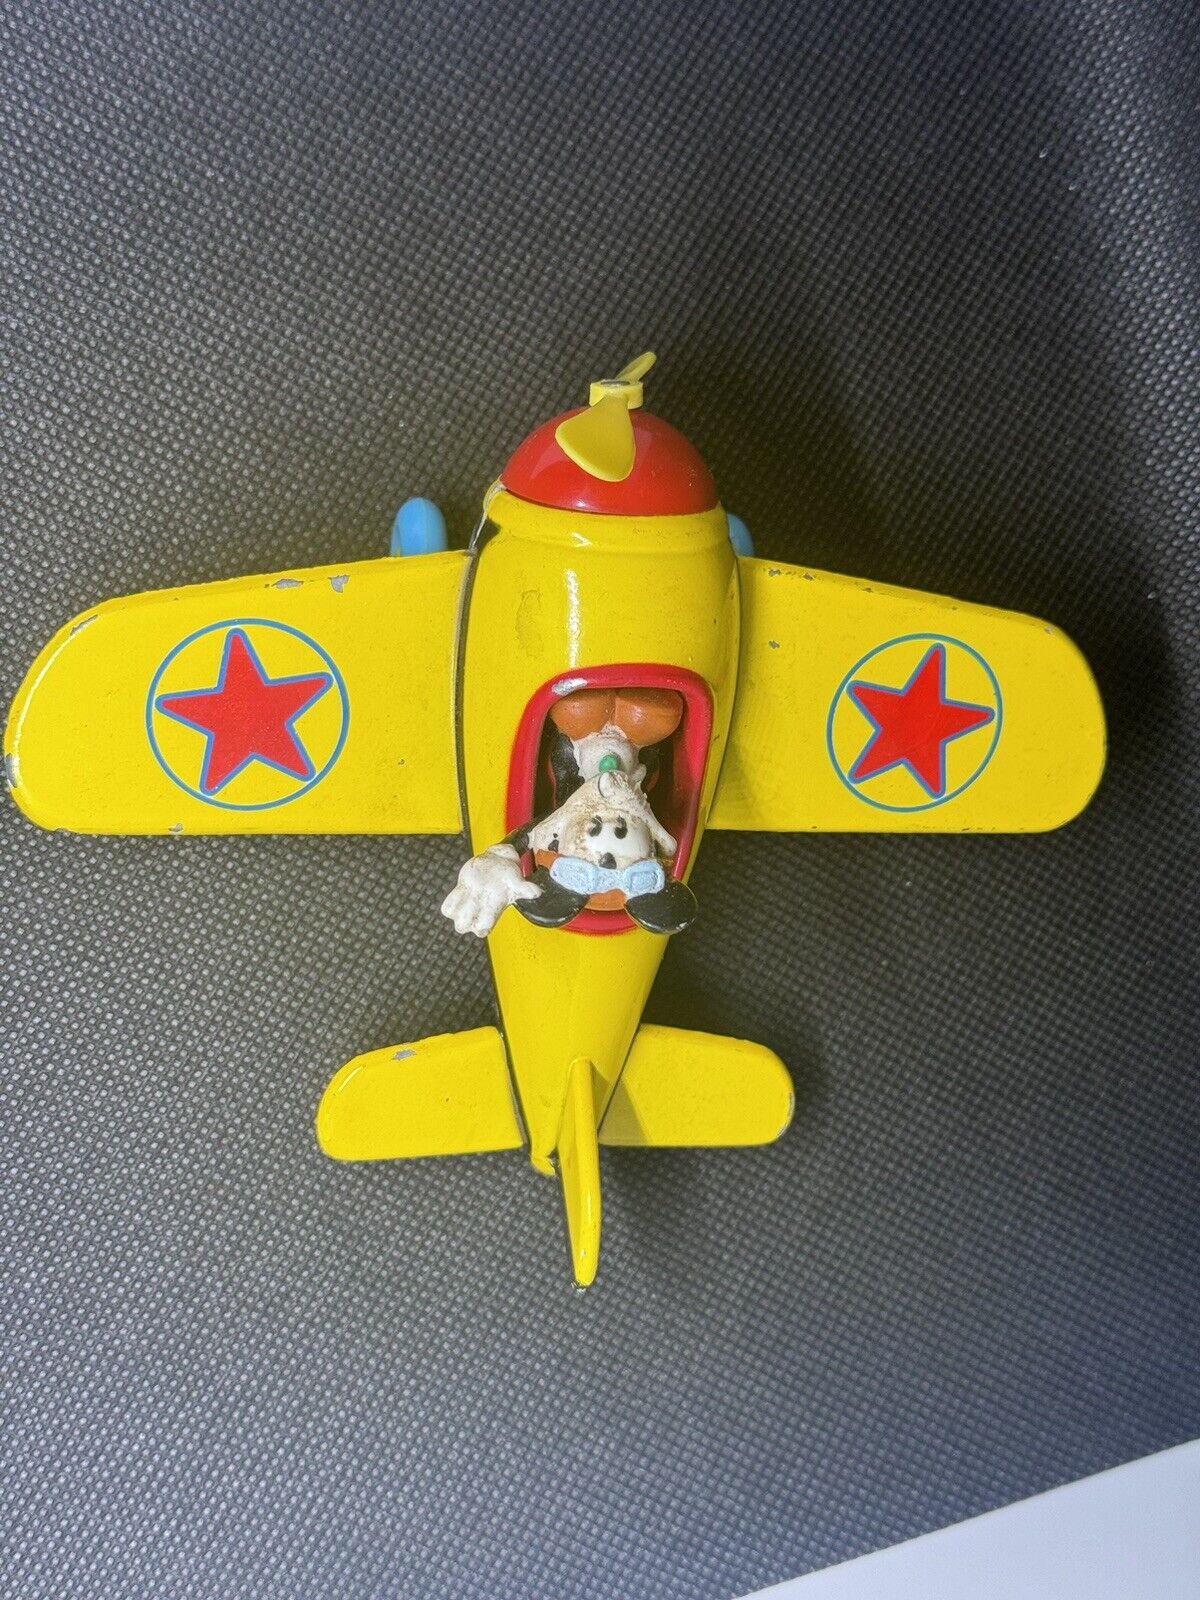 Vintage Disney Mickey Mouse Yellow Diecast Metal Airplane Toy Decopac 81’